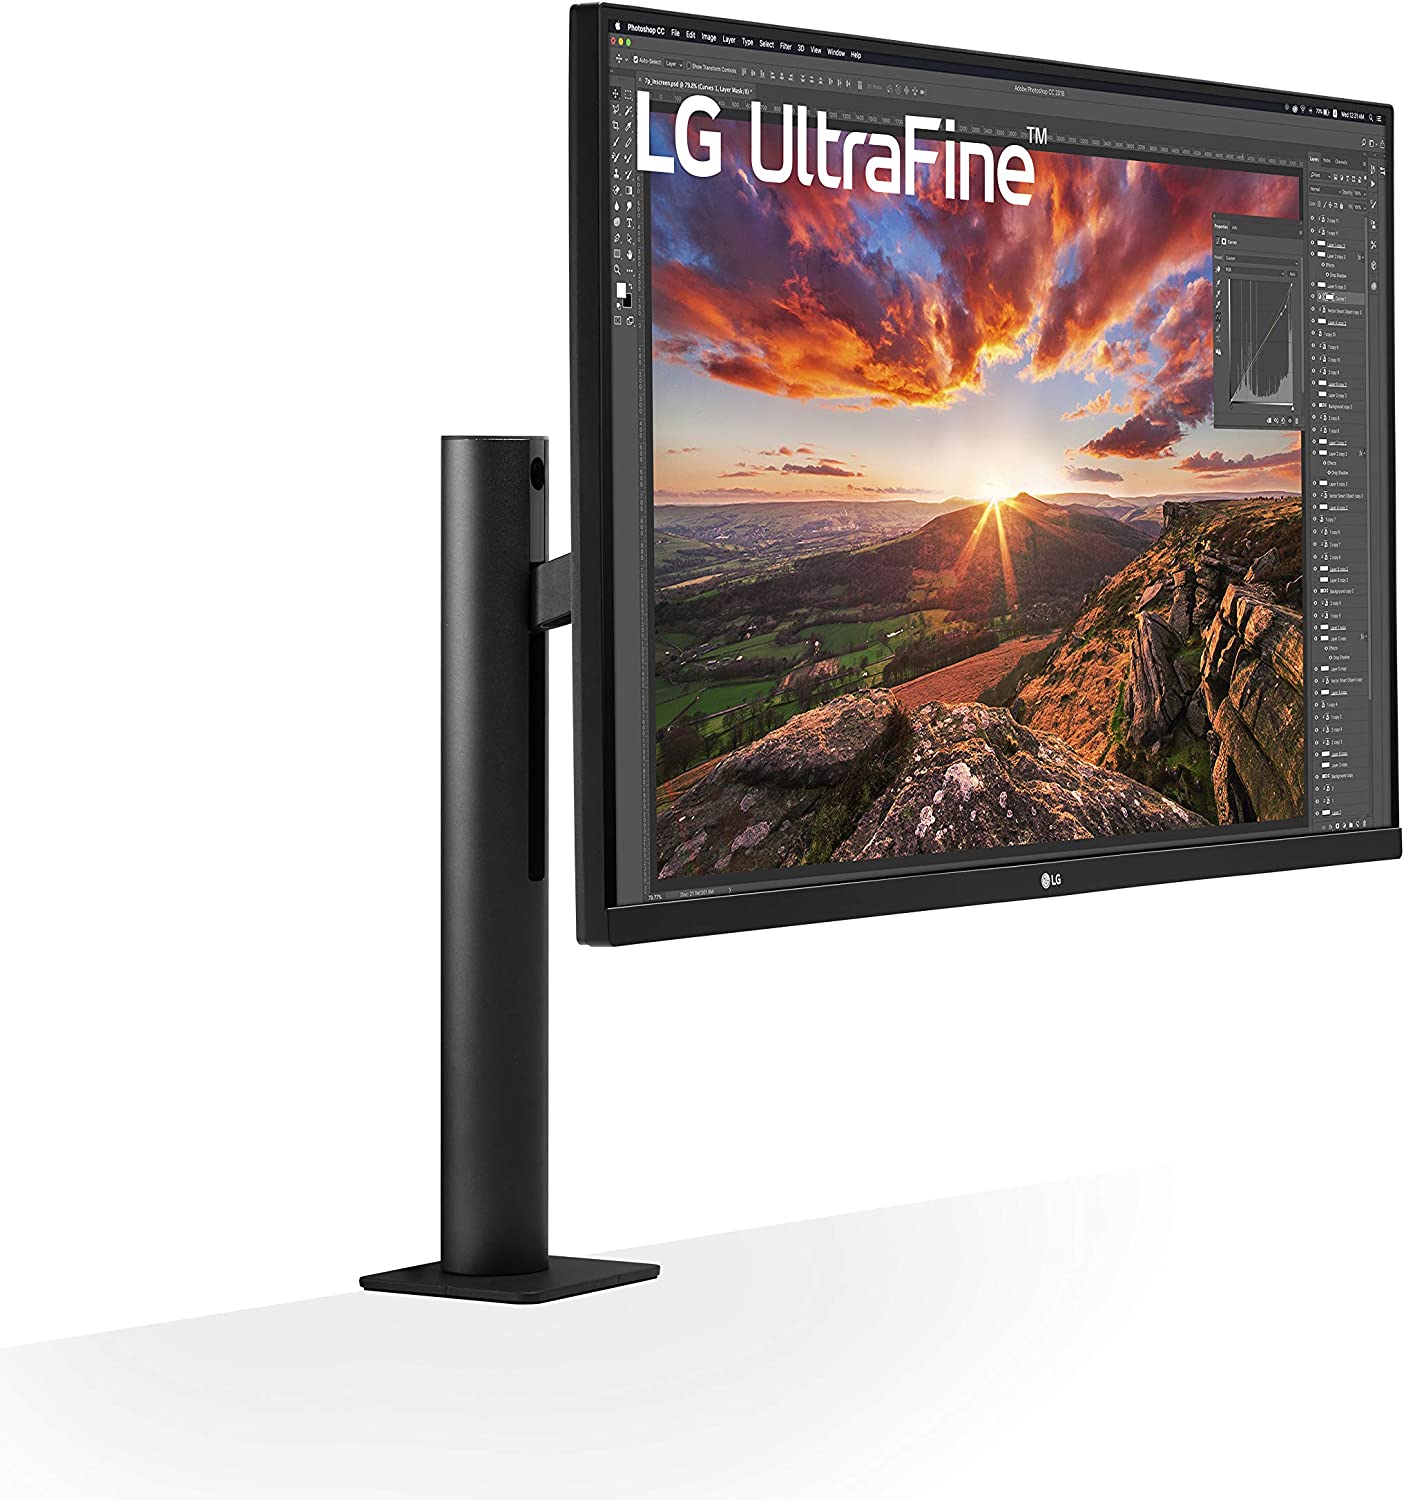 Review on the LG 32UN880 UltraFine Display Ergo